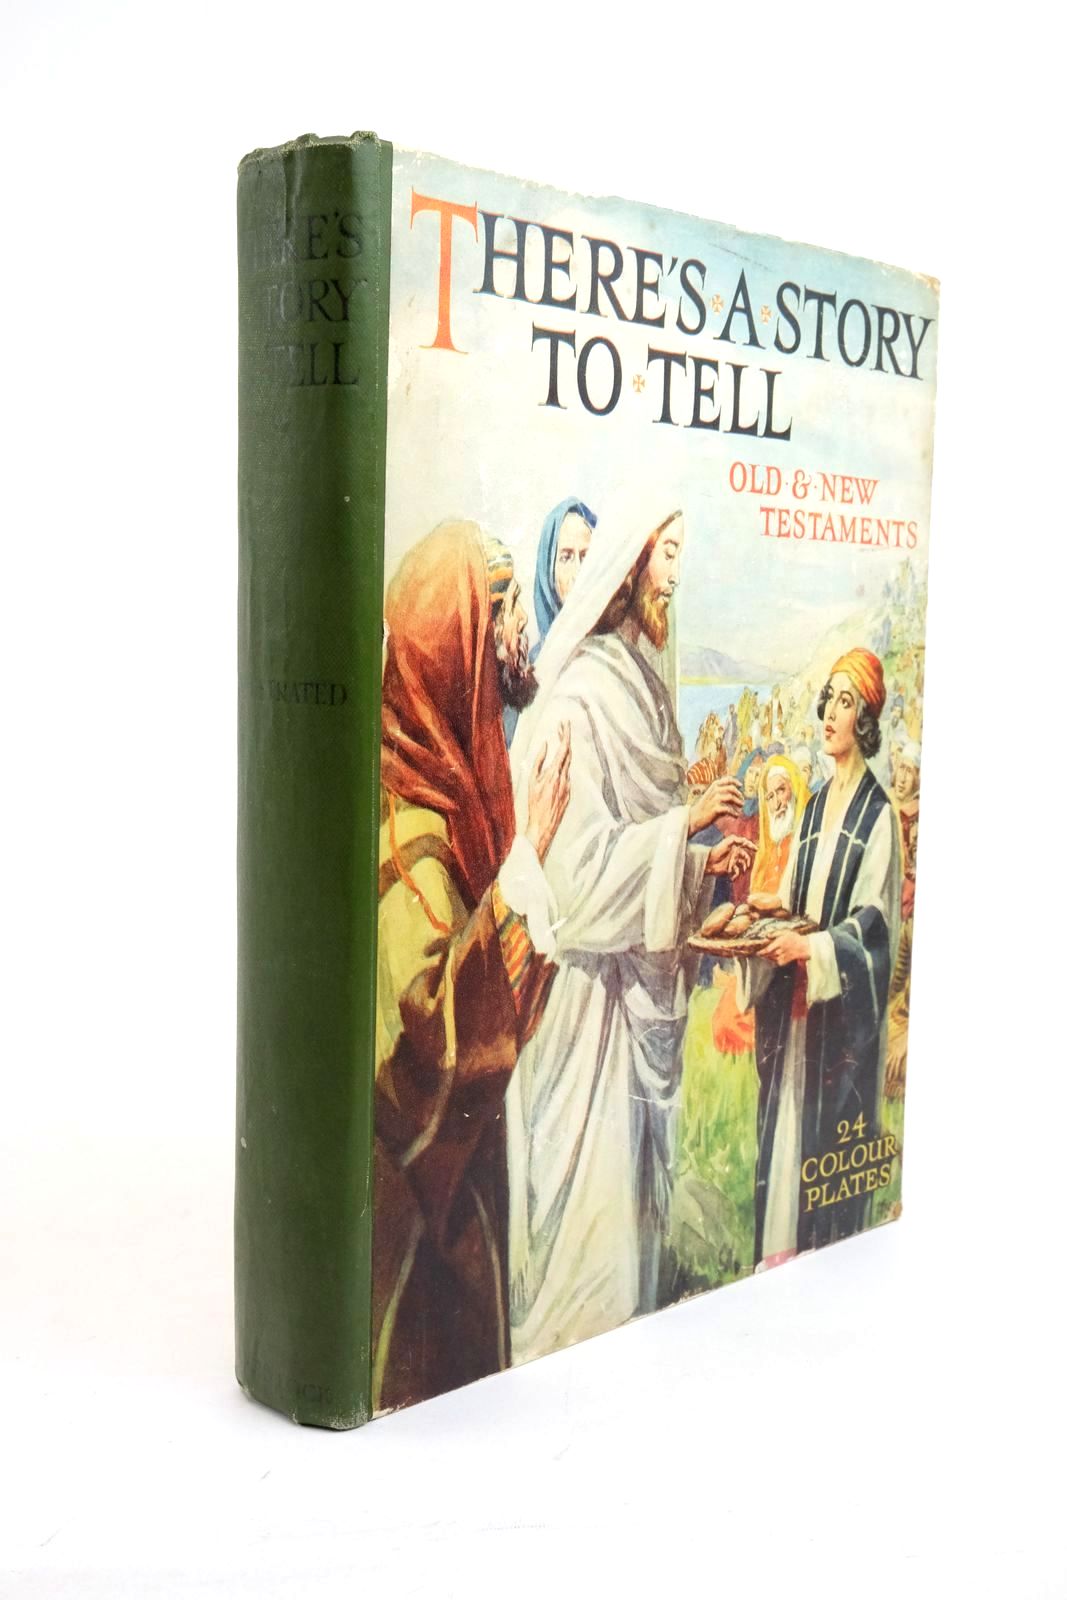 Photo of THERE'S A STORY TO TELL written by Winder, Blanche illustrated by Theaker, Harry G. published by Ward, Lock & Co. Ltd. (STOCK CODE: 1322372)  for sale by Stella & Rose's Books